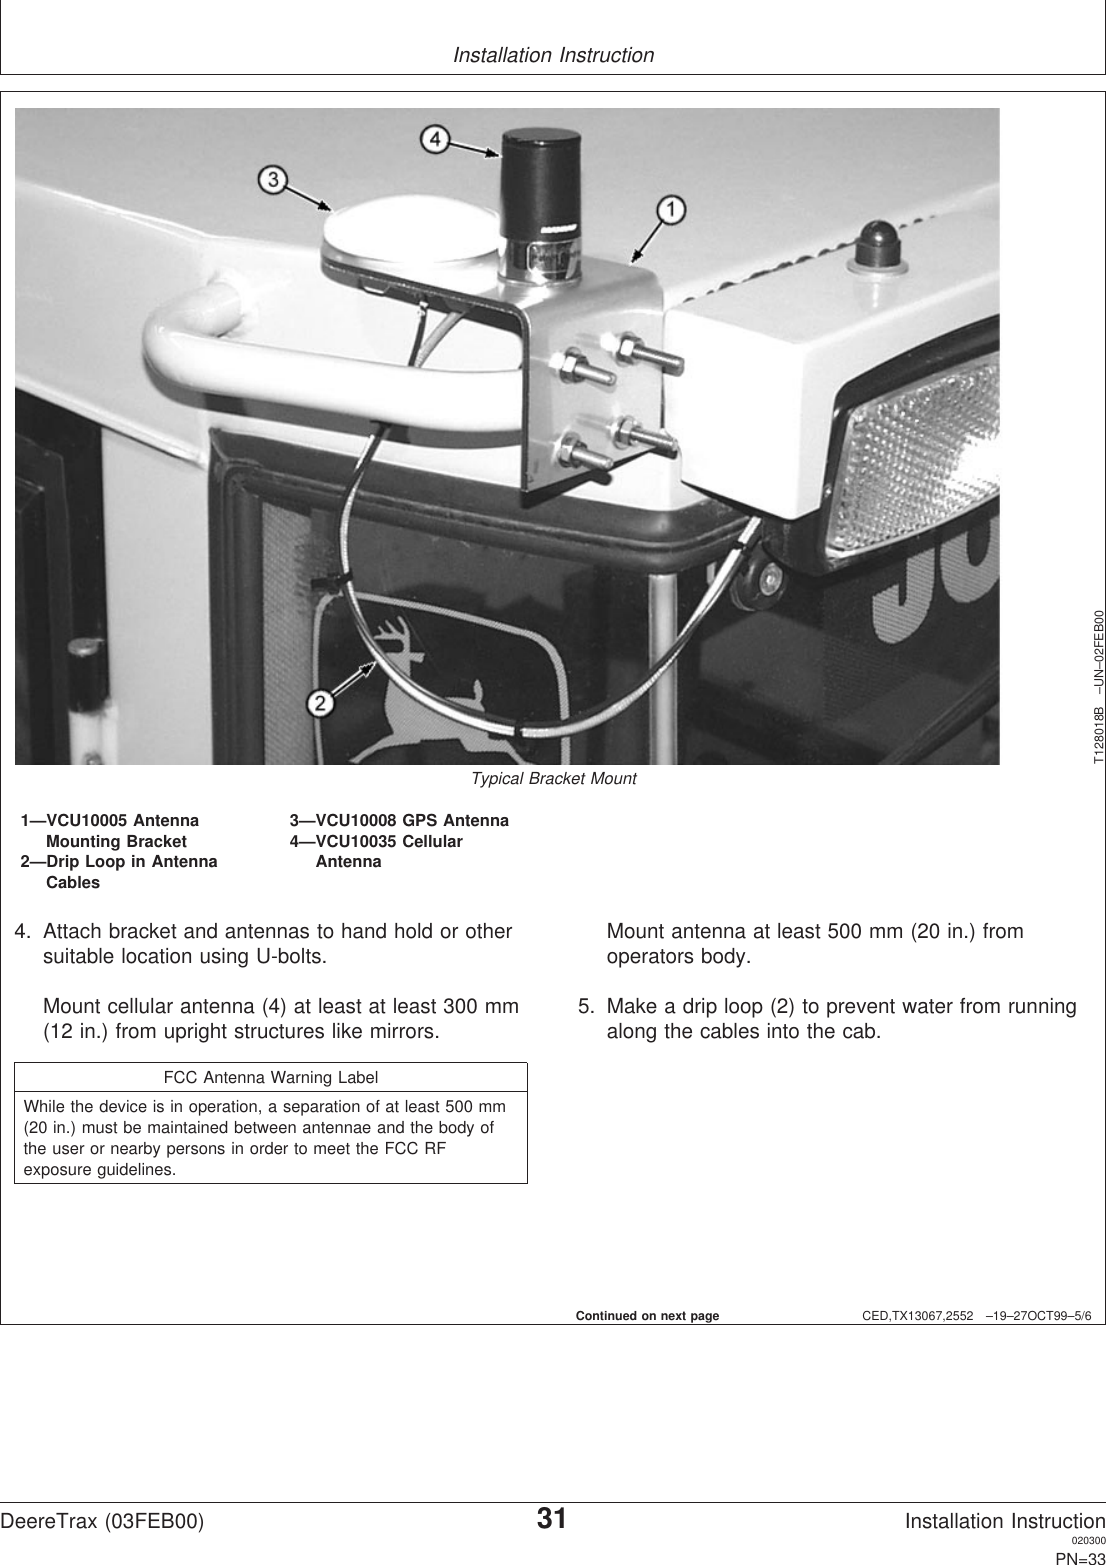 Installation InstructionCED,TX13067,2552 –19–27OCT99–5/6T128018B –UN–02FEB00Typical Bracket Mount1—VCU10005 Antenna 3—VCU10008 GPS AntennaMounting Bracket 4—VCU10035 Cellular2—Drip Loop in Antenna AntennaCables4. Attach bracket and antennas to hand hold or othersuitable location using U-bolts.Mount cellular antenna (4) at least at least 300 mm(12 in.) from upright structures like mirrors.FCC Antenna Warning LabelWhile the device is in operation, a separation of at least 500 mm(20 in.) must be maintained between antennae and the body ofthe user or nearby persons in order to meet the FCC RFexposure guidelines.Mount antenna at least 500 mm (20 in.) fromoperators body.5. Make a drip loop (2) to prevent water from runningalong the cables into the cab.Continued on next pageDeereTrax (03FEB00)31Installation Instruction020300PN=33